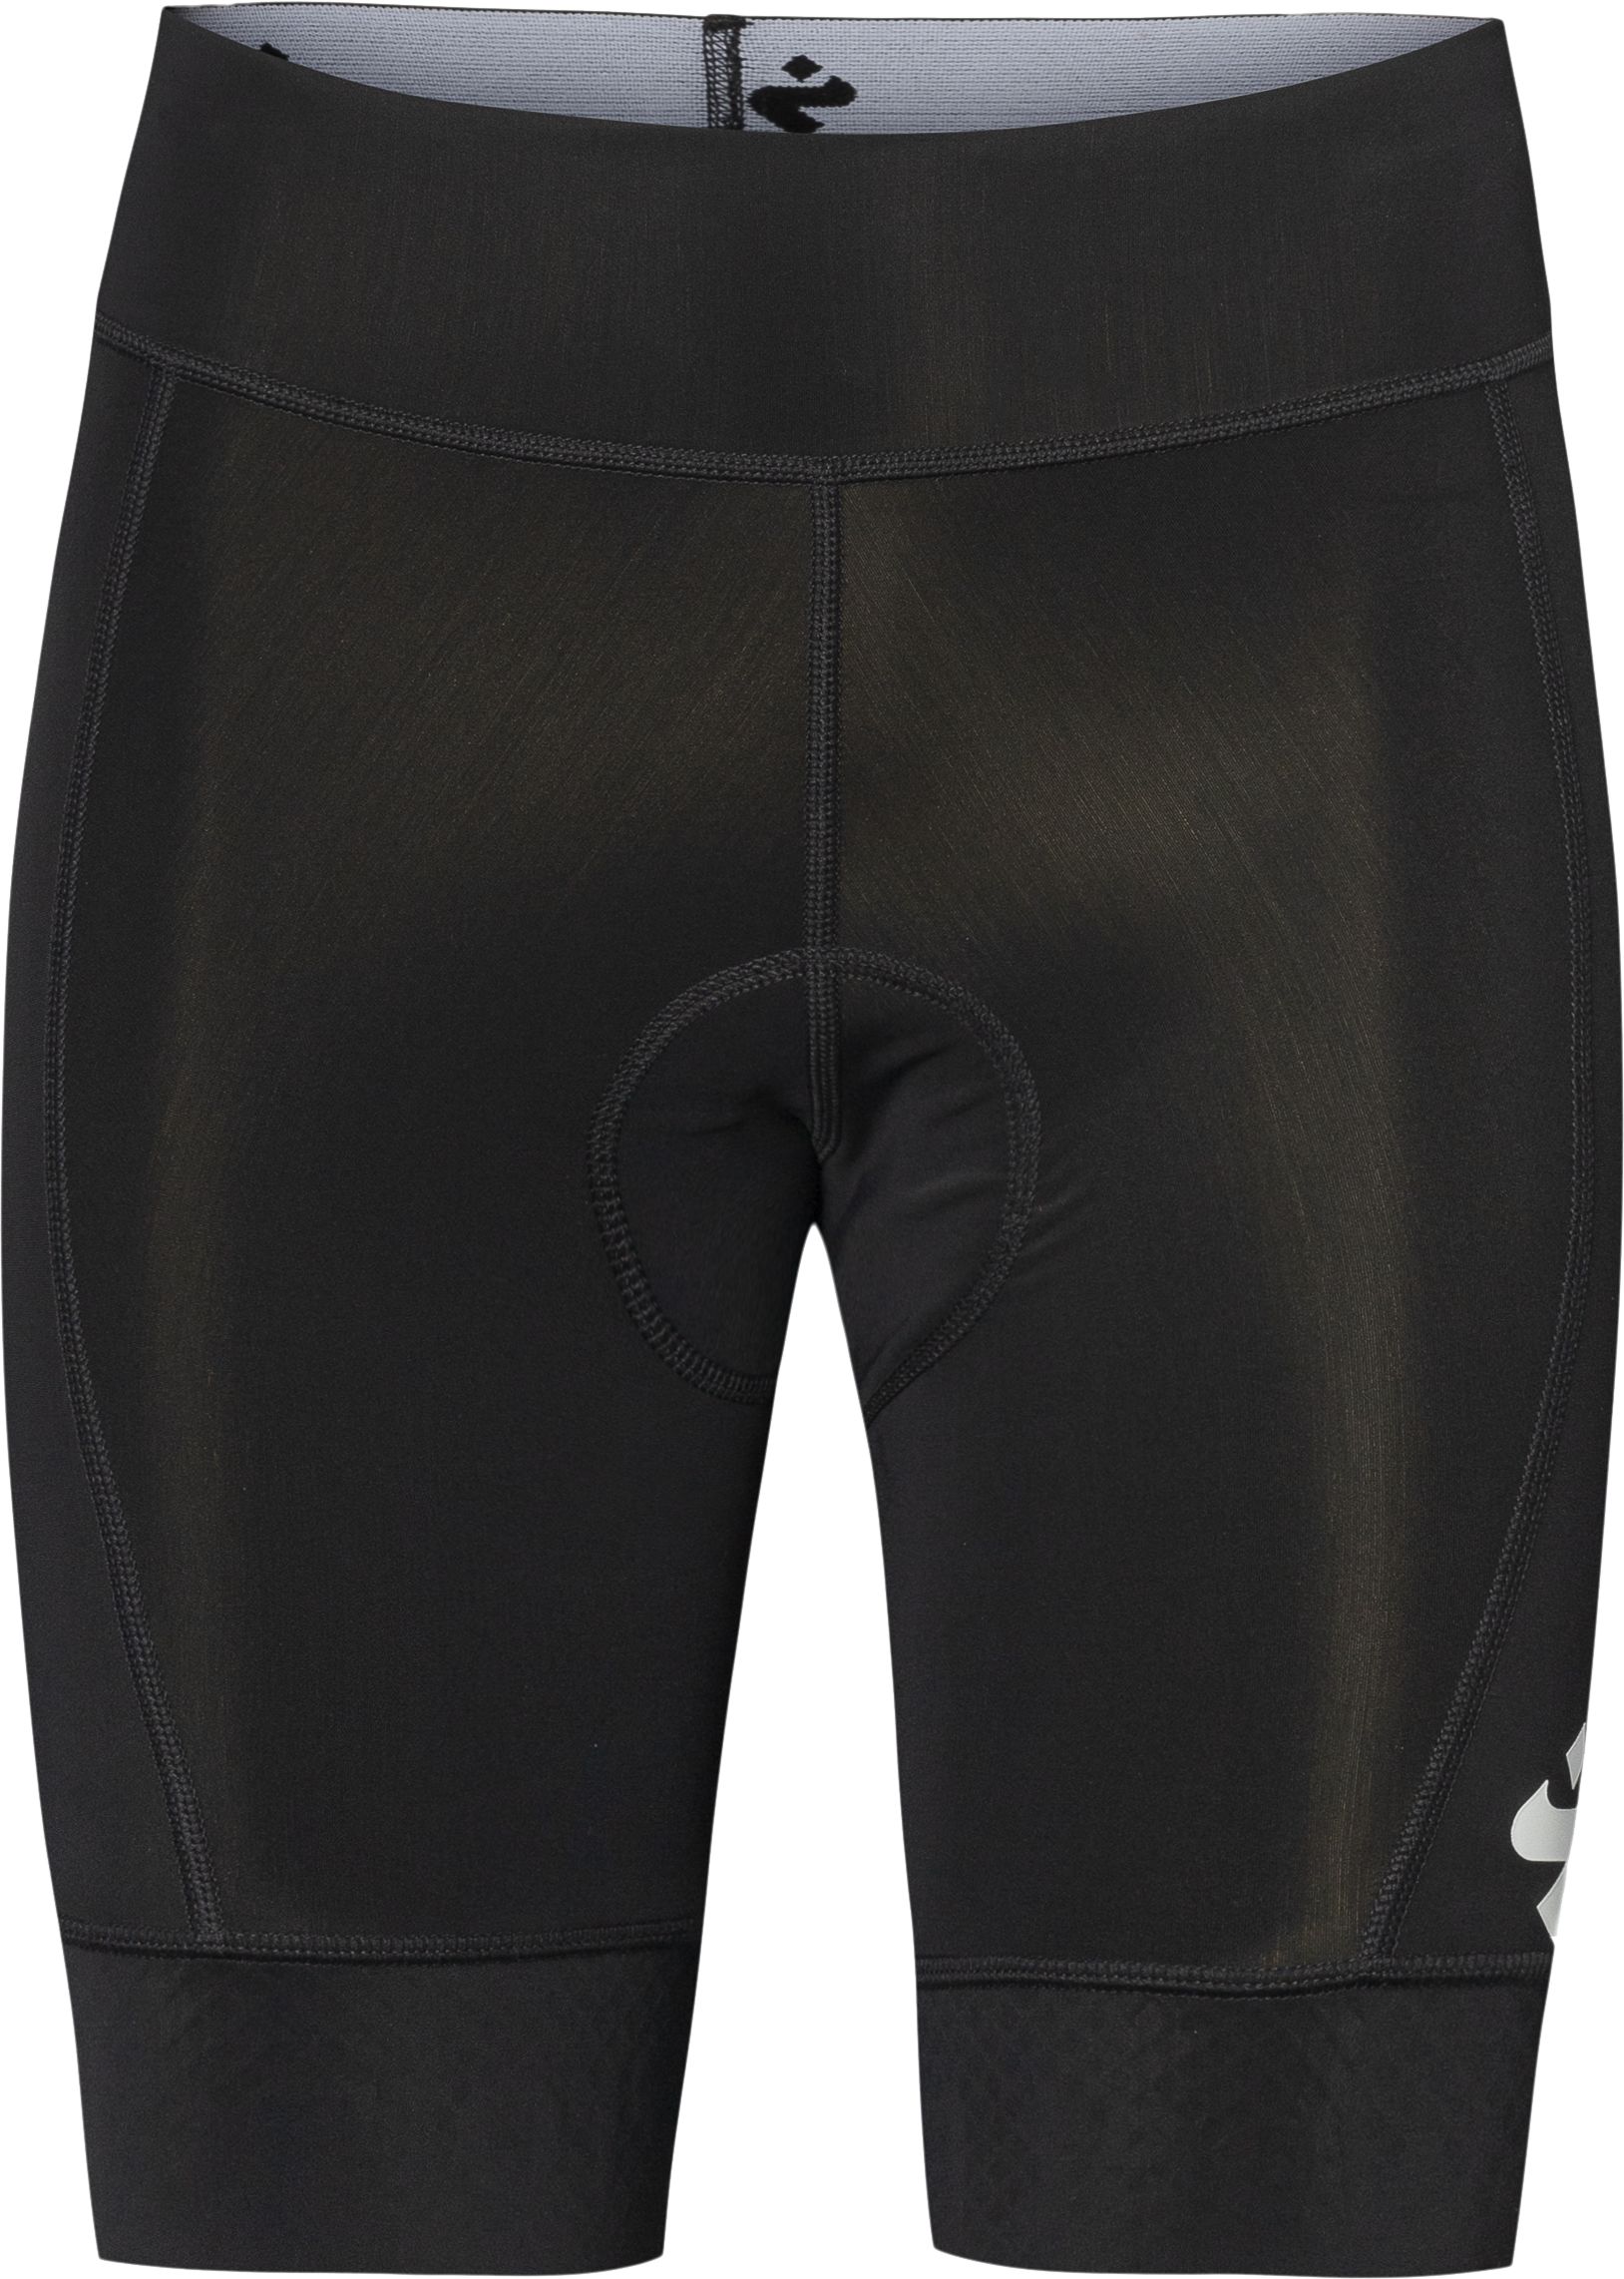 SWEET PROTECTION, W HUNTER ROLLER SHORTS